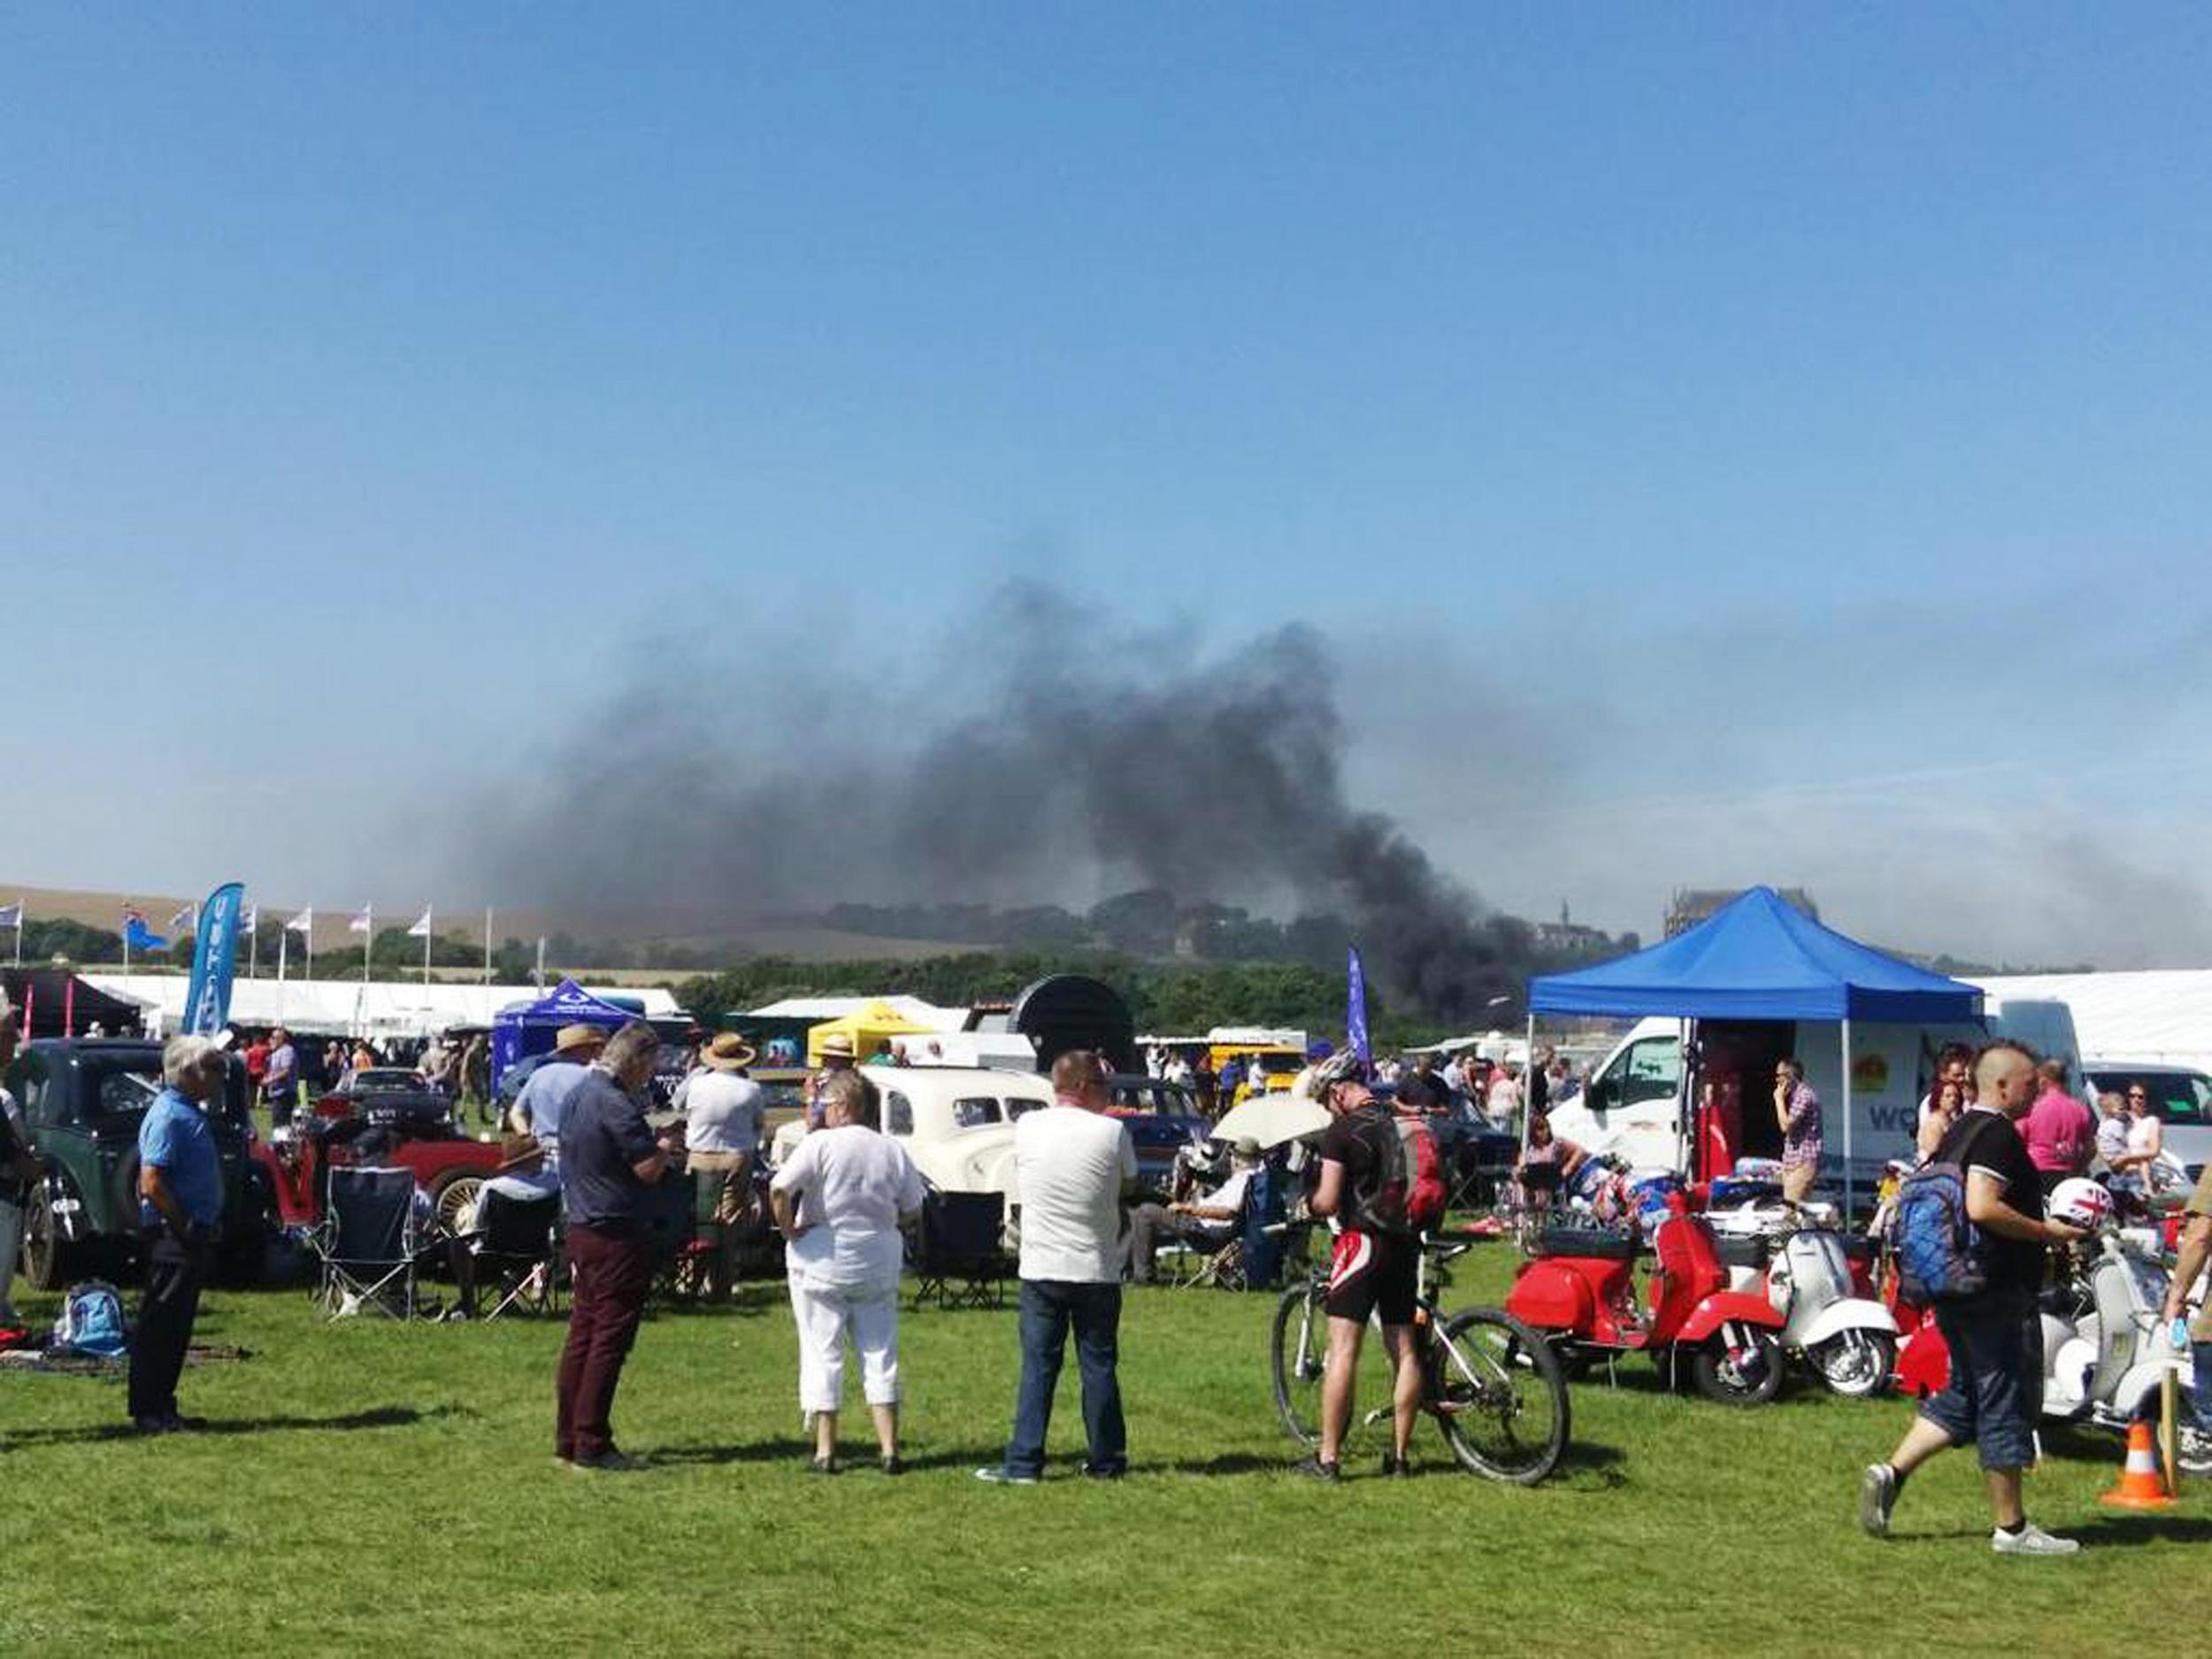 Smoke is seen following a crash involving a plane near Shoreham Airshow in West Sussex